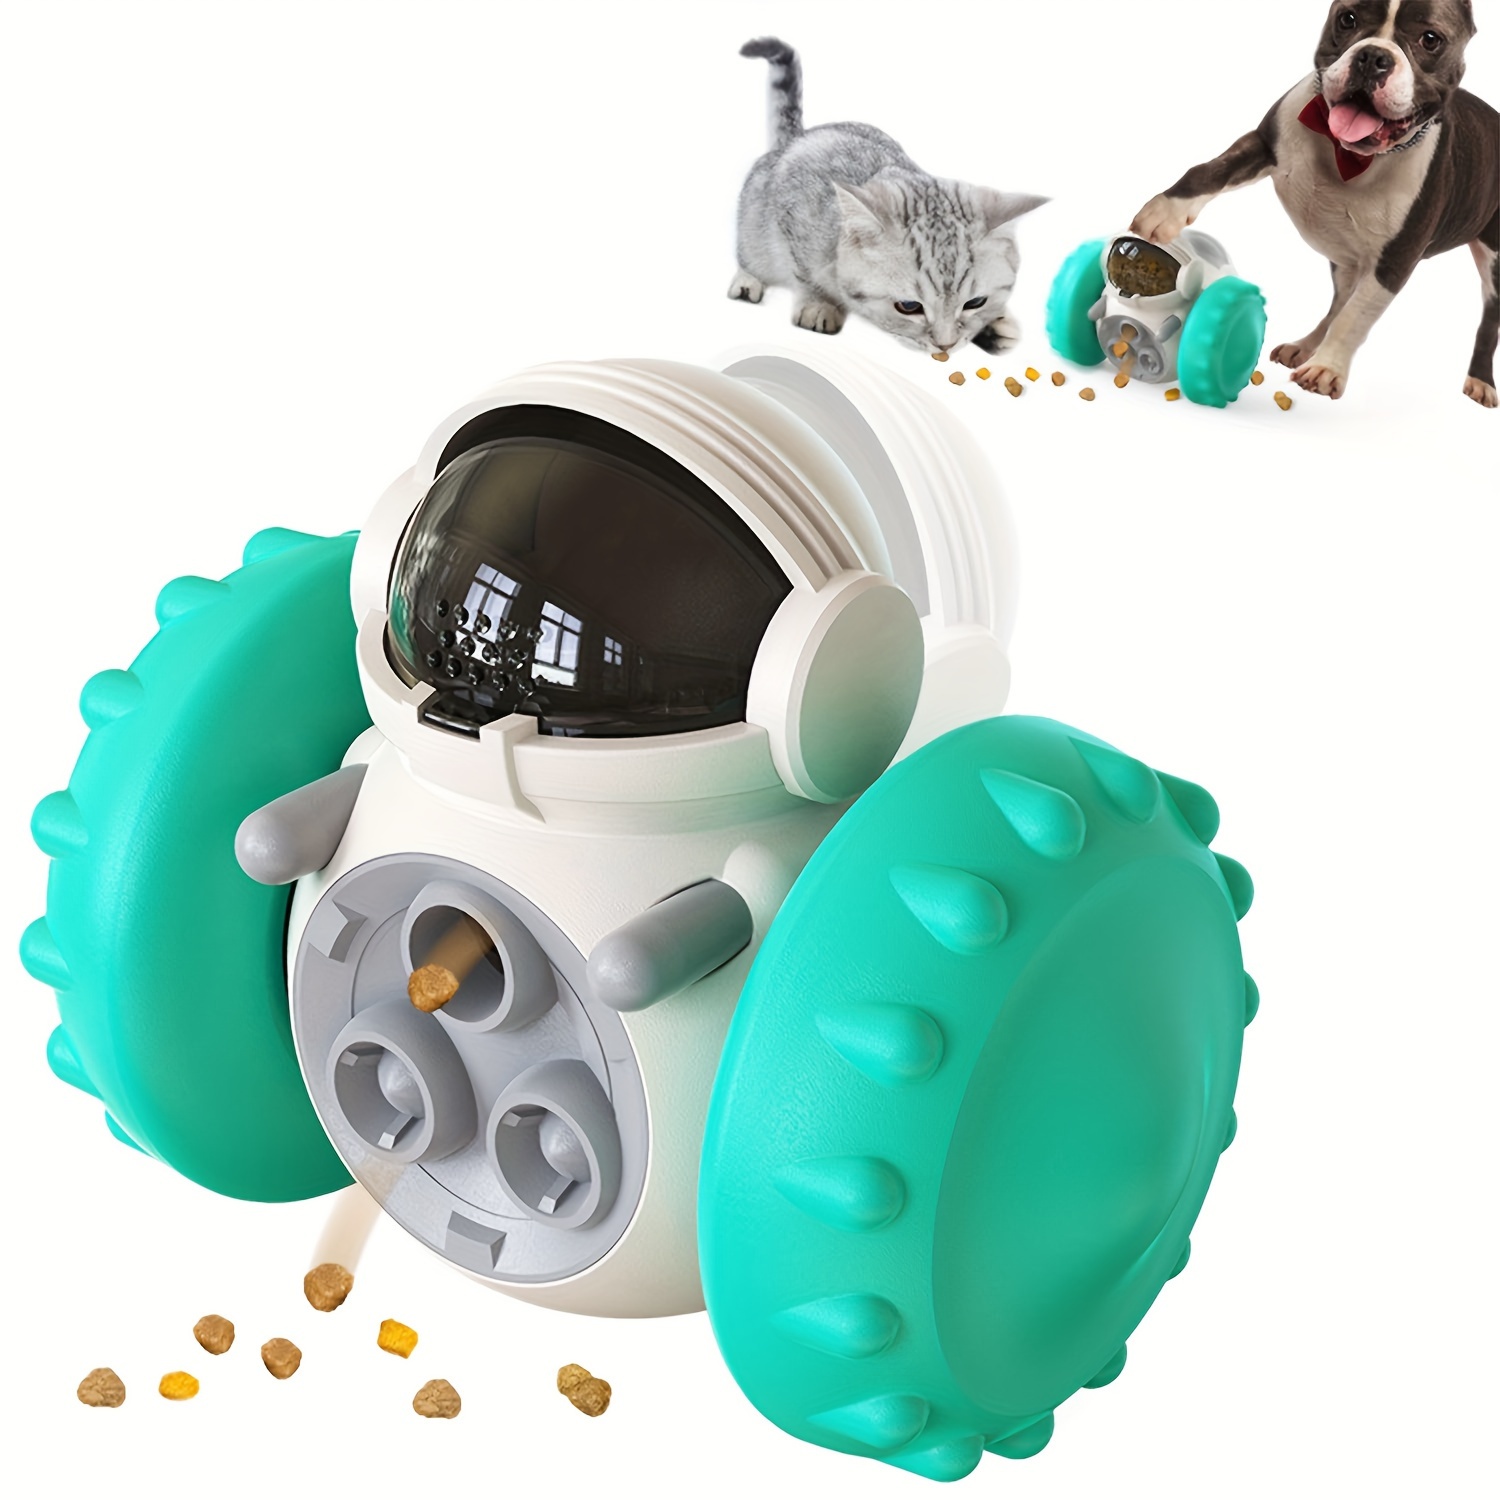 

Interactive Pet Food Dispenser Toy For Dogs And Cats - Anti-overturn Chew Toy, Slow Feeder, Treat Dispensing Puzzle Toy To Improve Intelligence